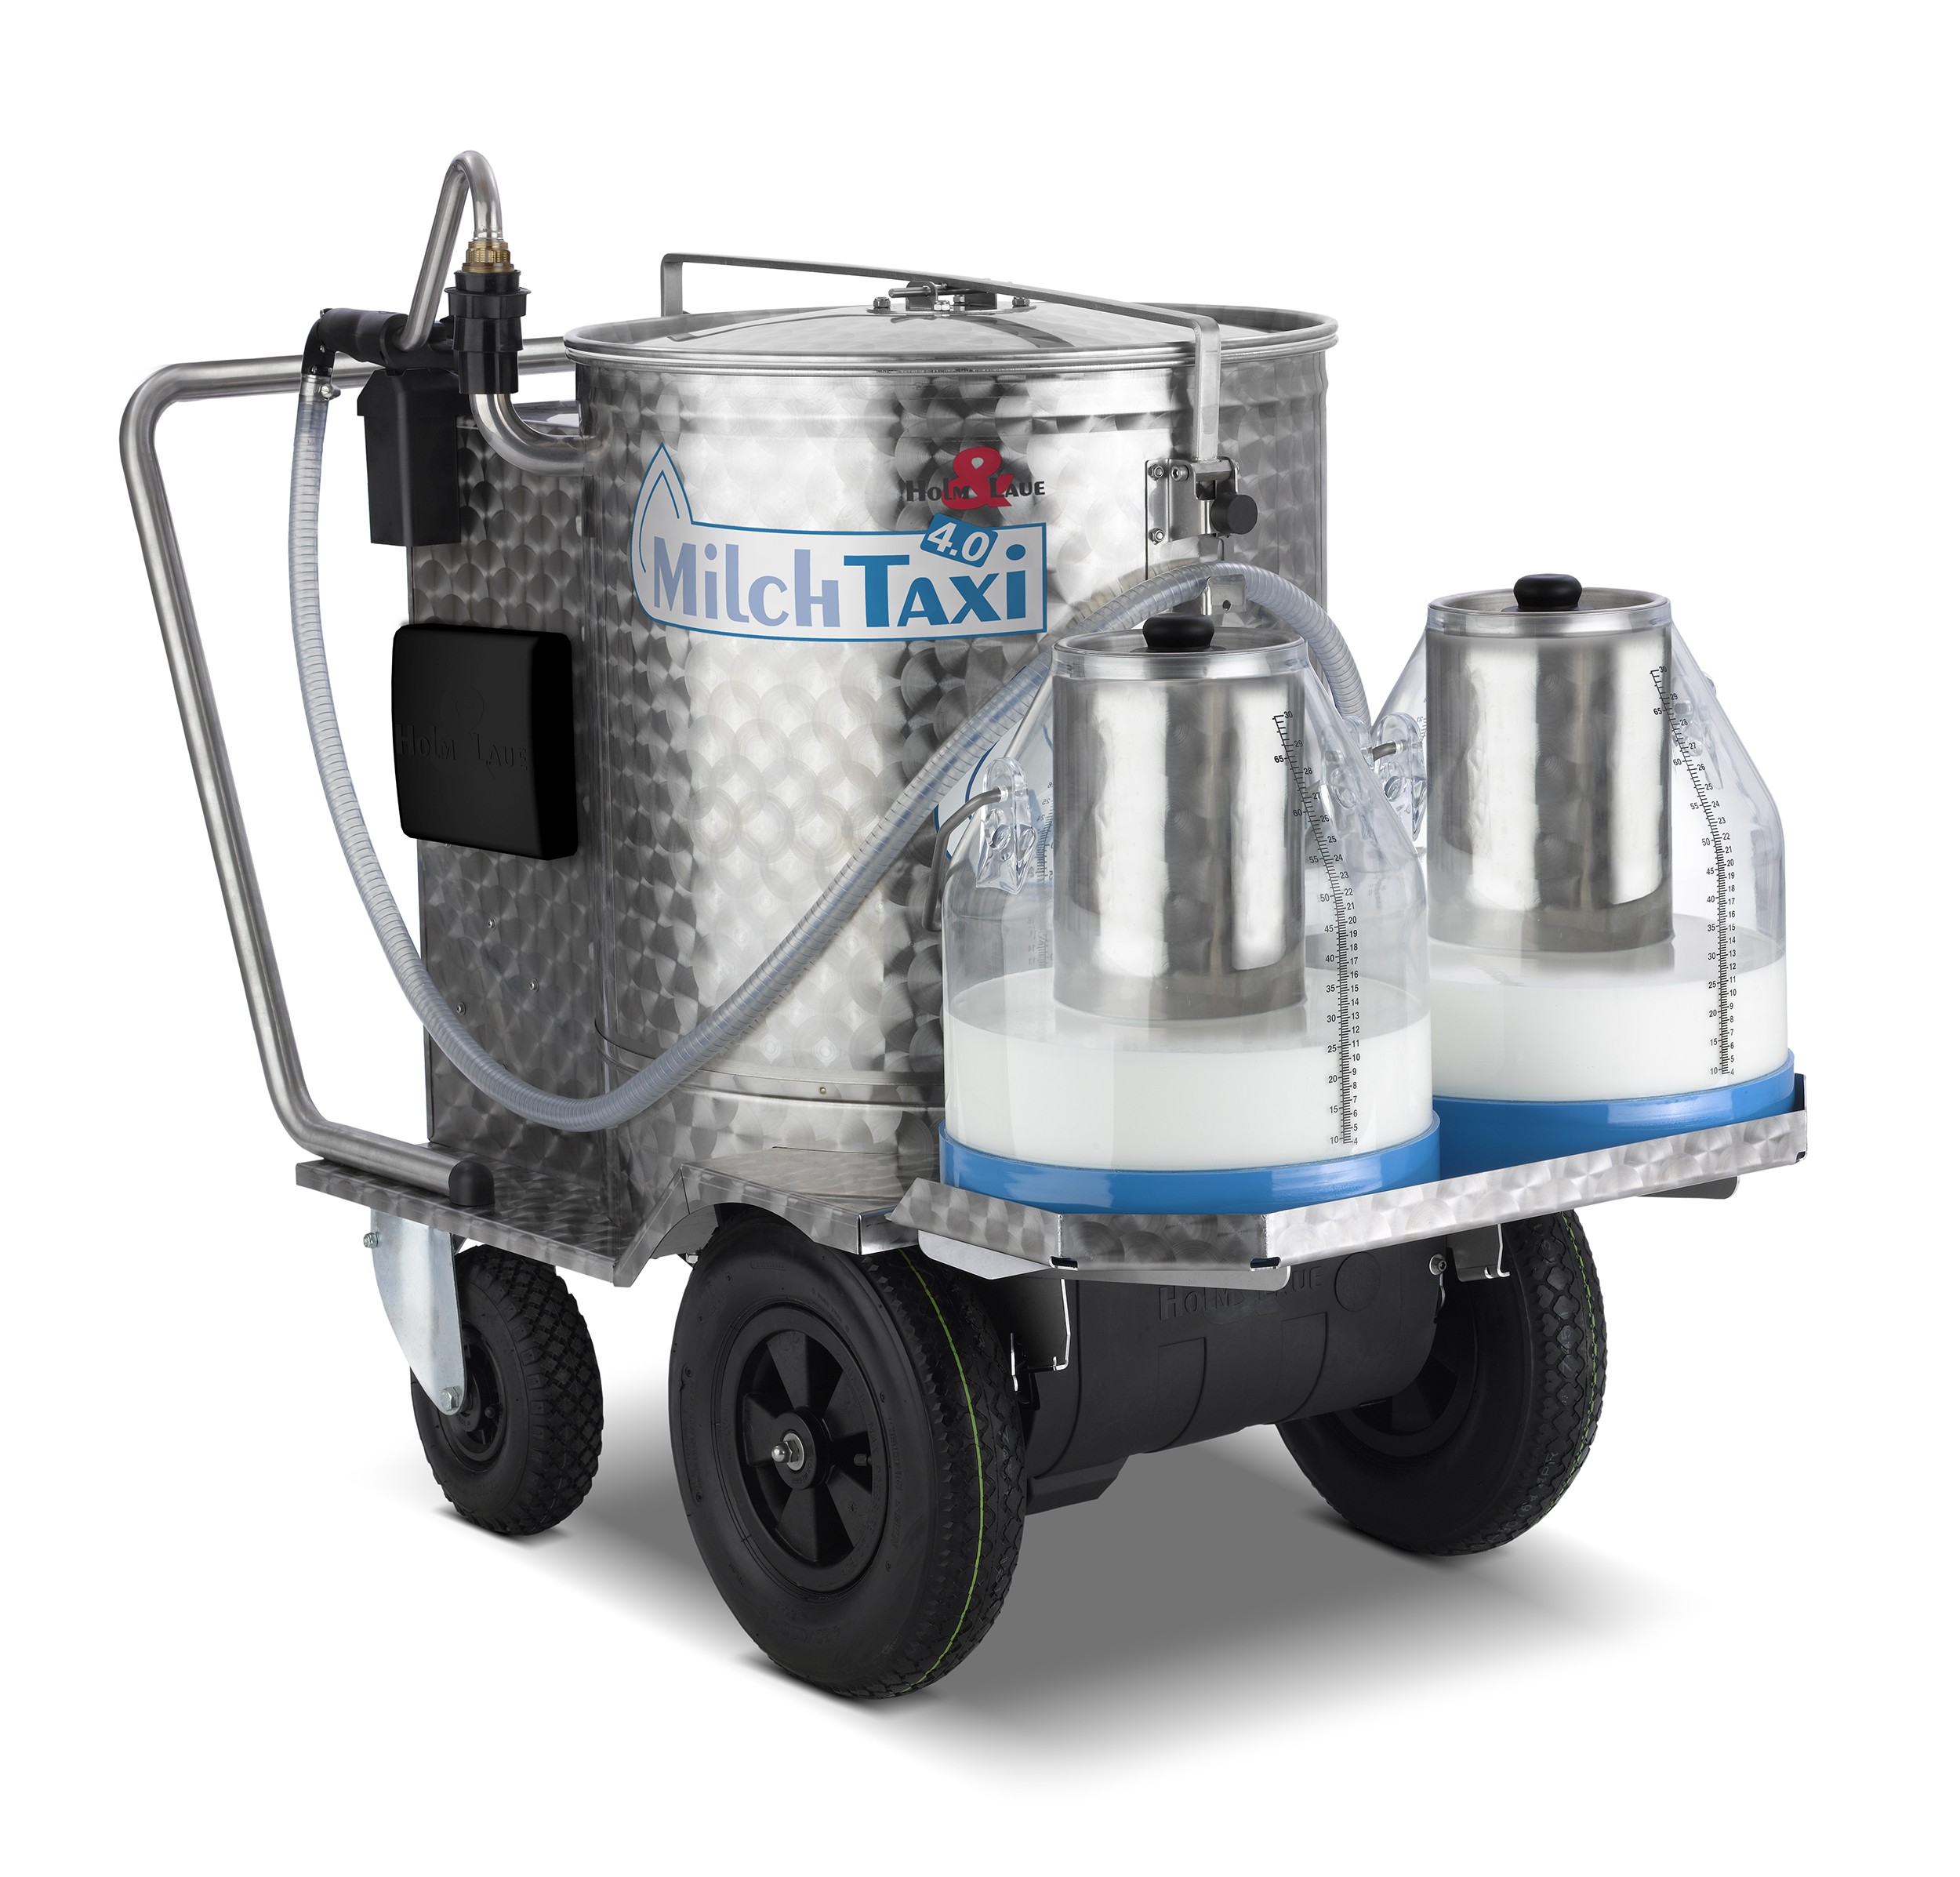 MilkTaxi with antenna and milk churn holder frame including two milk churns